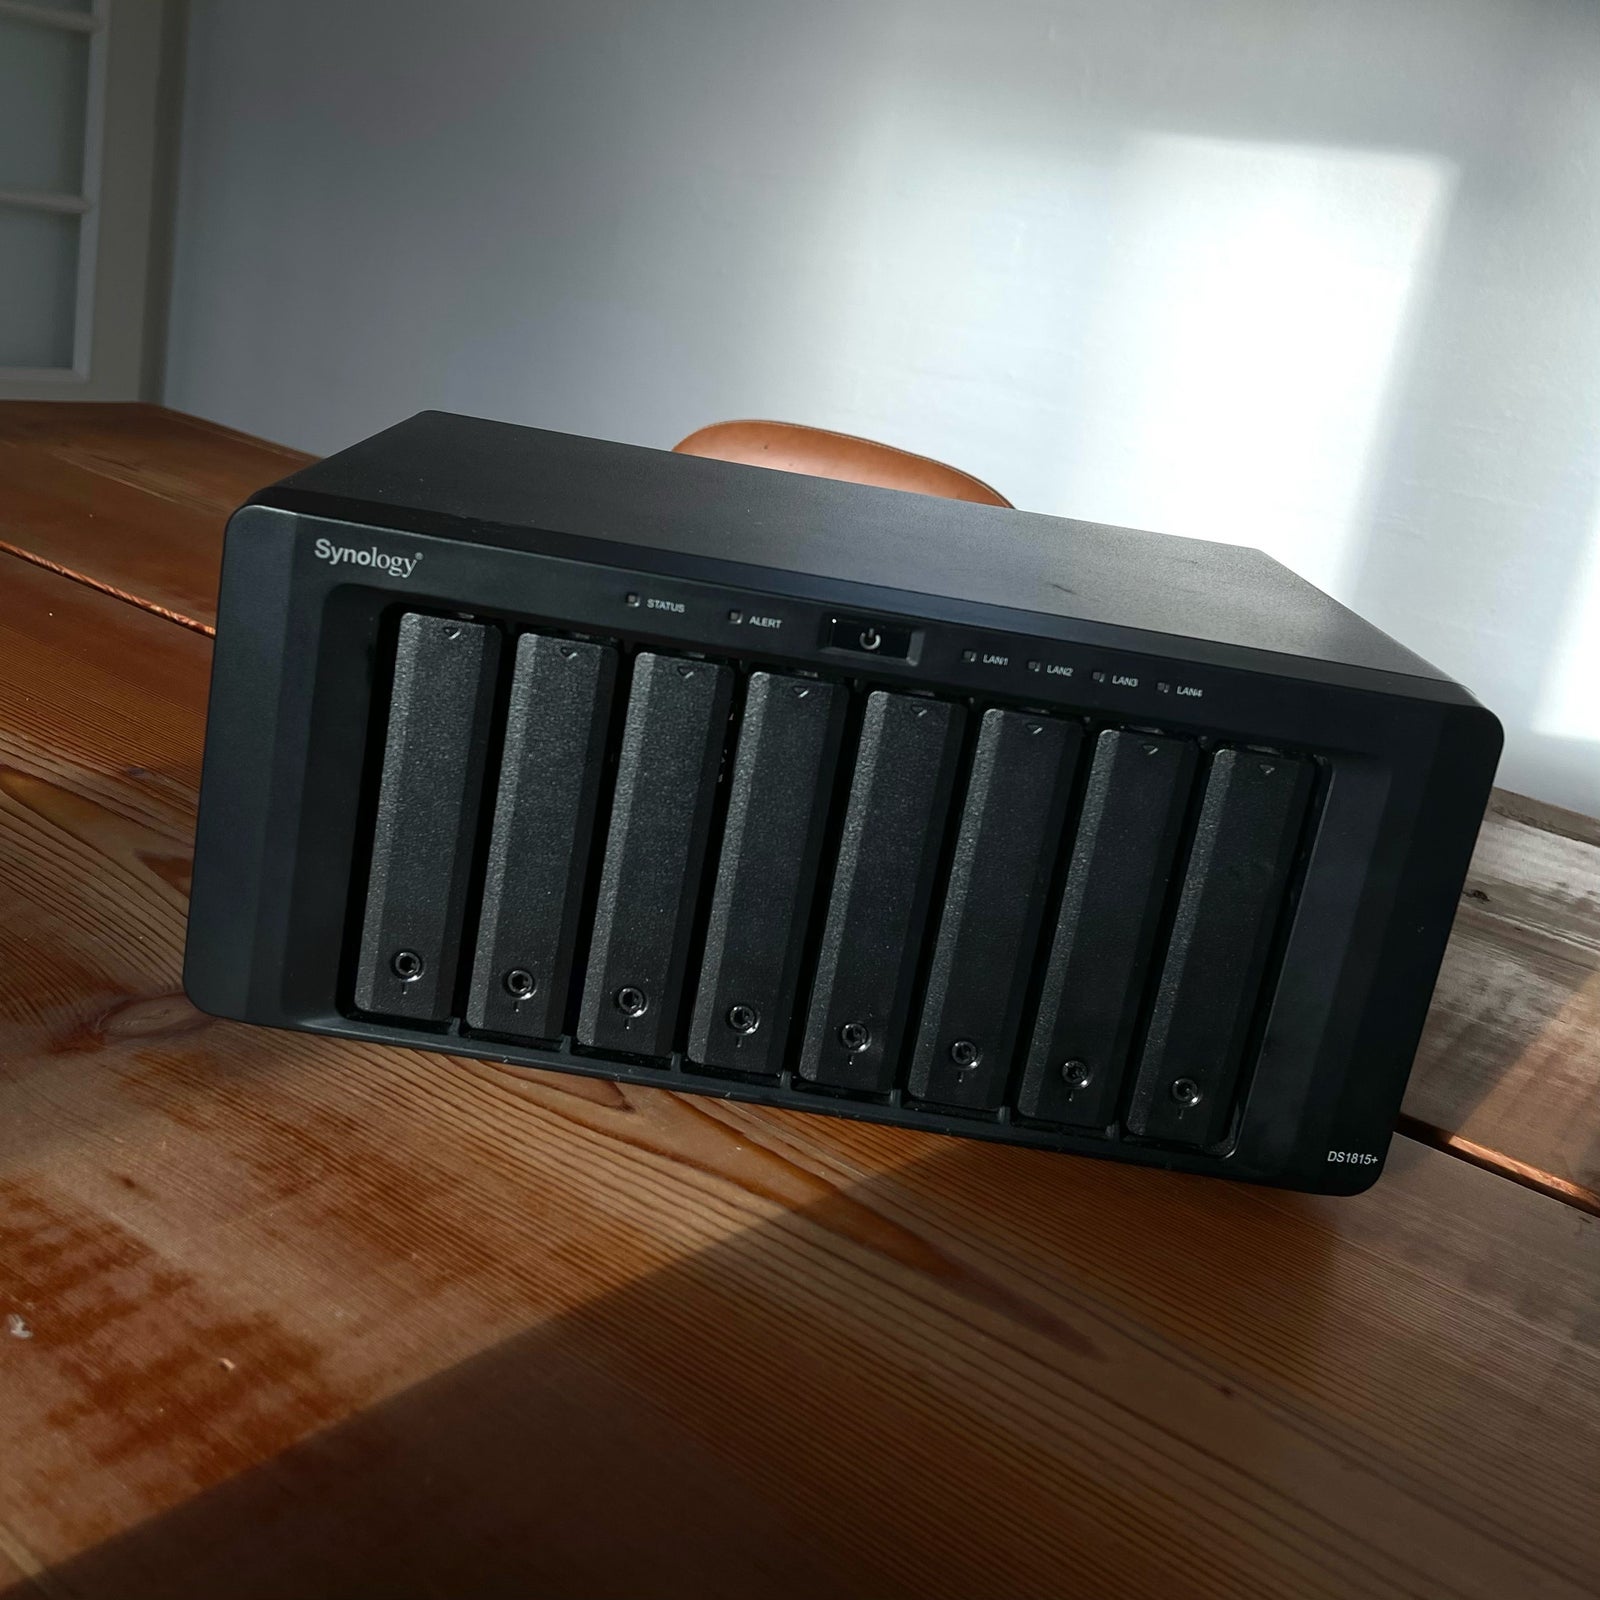 NAS, Synology DS1815+, God